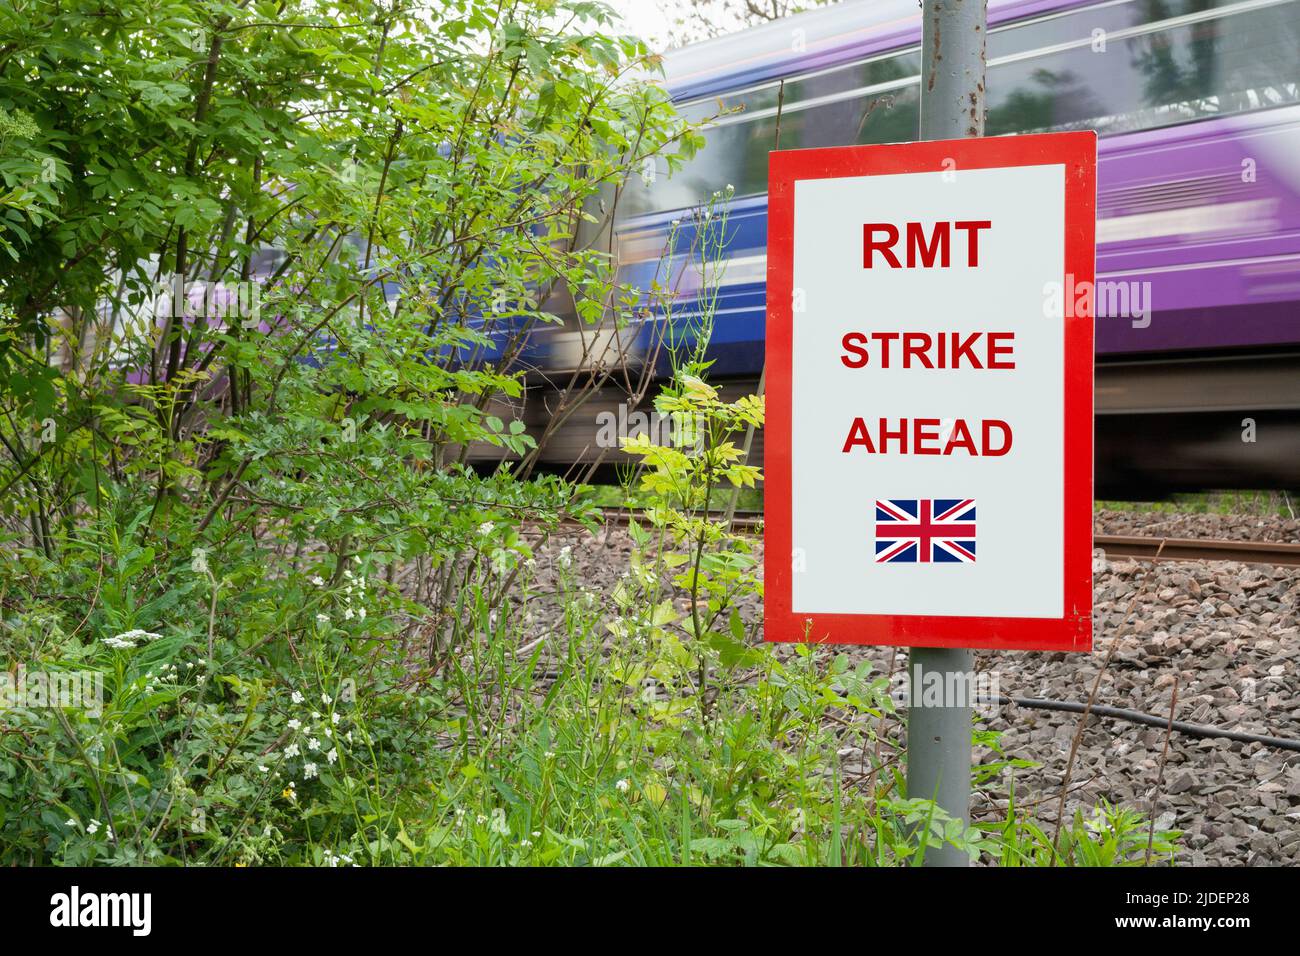 RMT union rail strike ahead sign with speeding train in background. Stock Photo